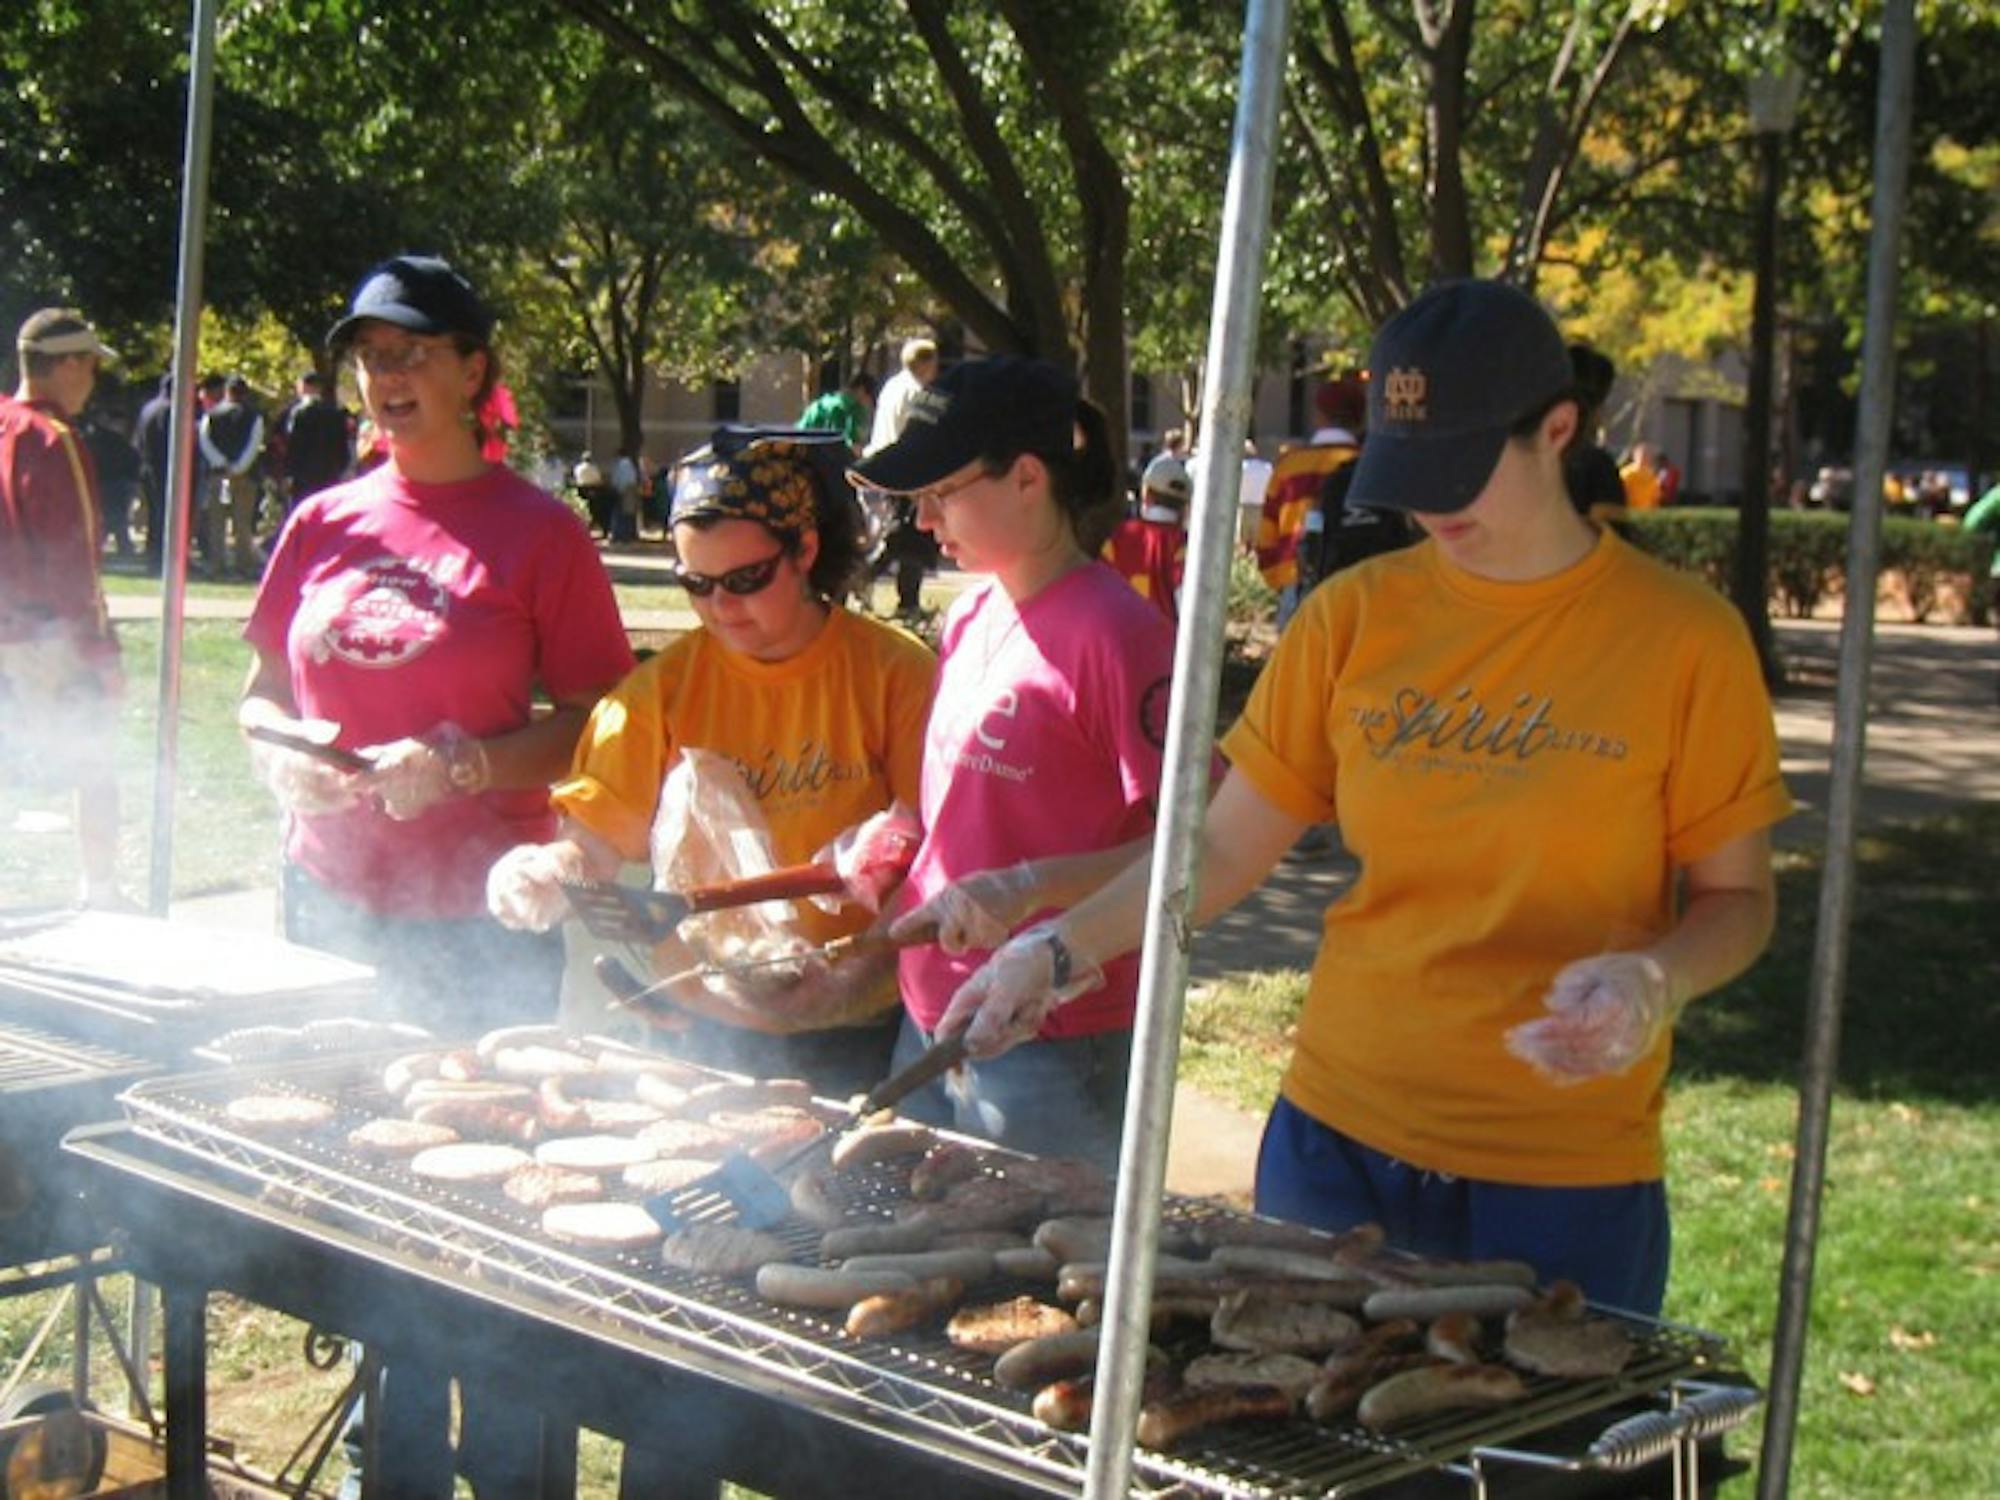 Members of the Society of Women Engineers grill hot dogs and hamburgers before a Notre Dame football game as part of its fundraising efforts.